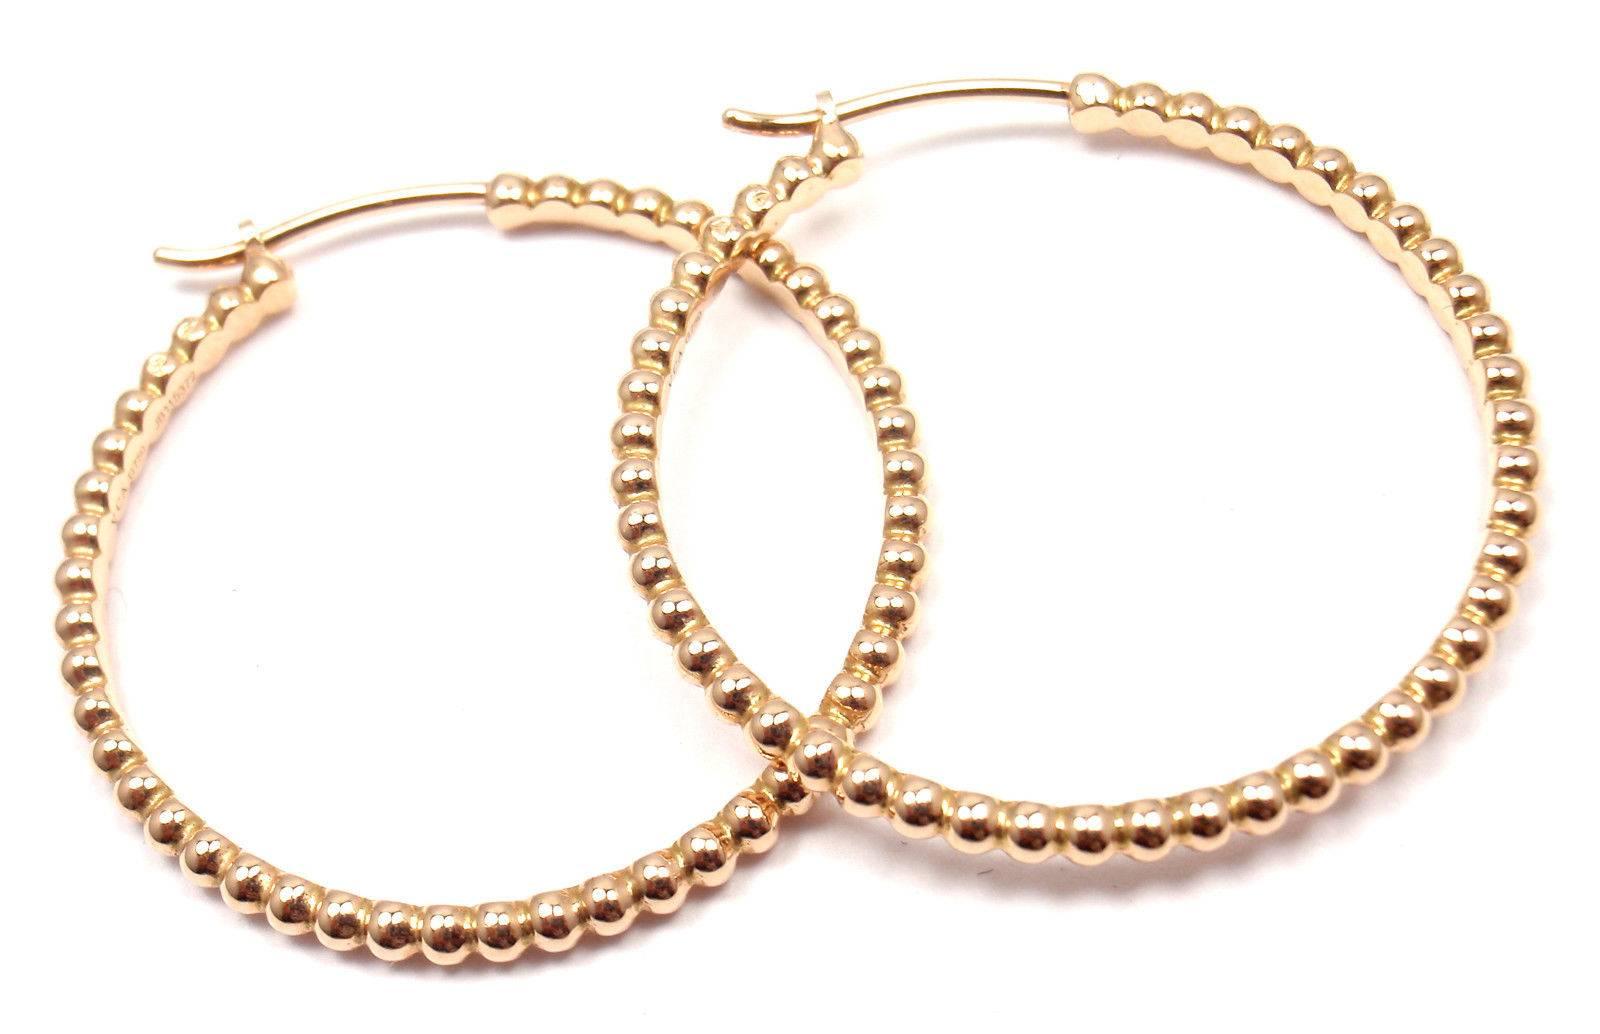 18k Rose Gold Perlee Hoop Earrings by Van Cleef & Arpels. 
These earrings are for pierced ears. 

Details: 
Measurements: 33mm
Weight: 7.8 grams
Stamped Hallmarks: VCA 18KT JB115372

*Free Shipping within the United States* 

YOUR PRICE: